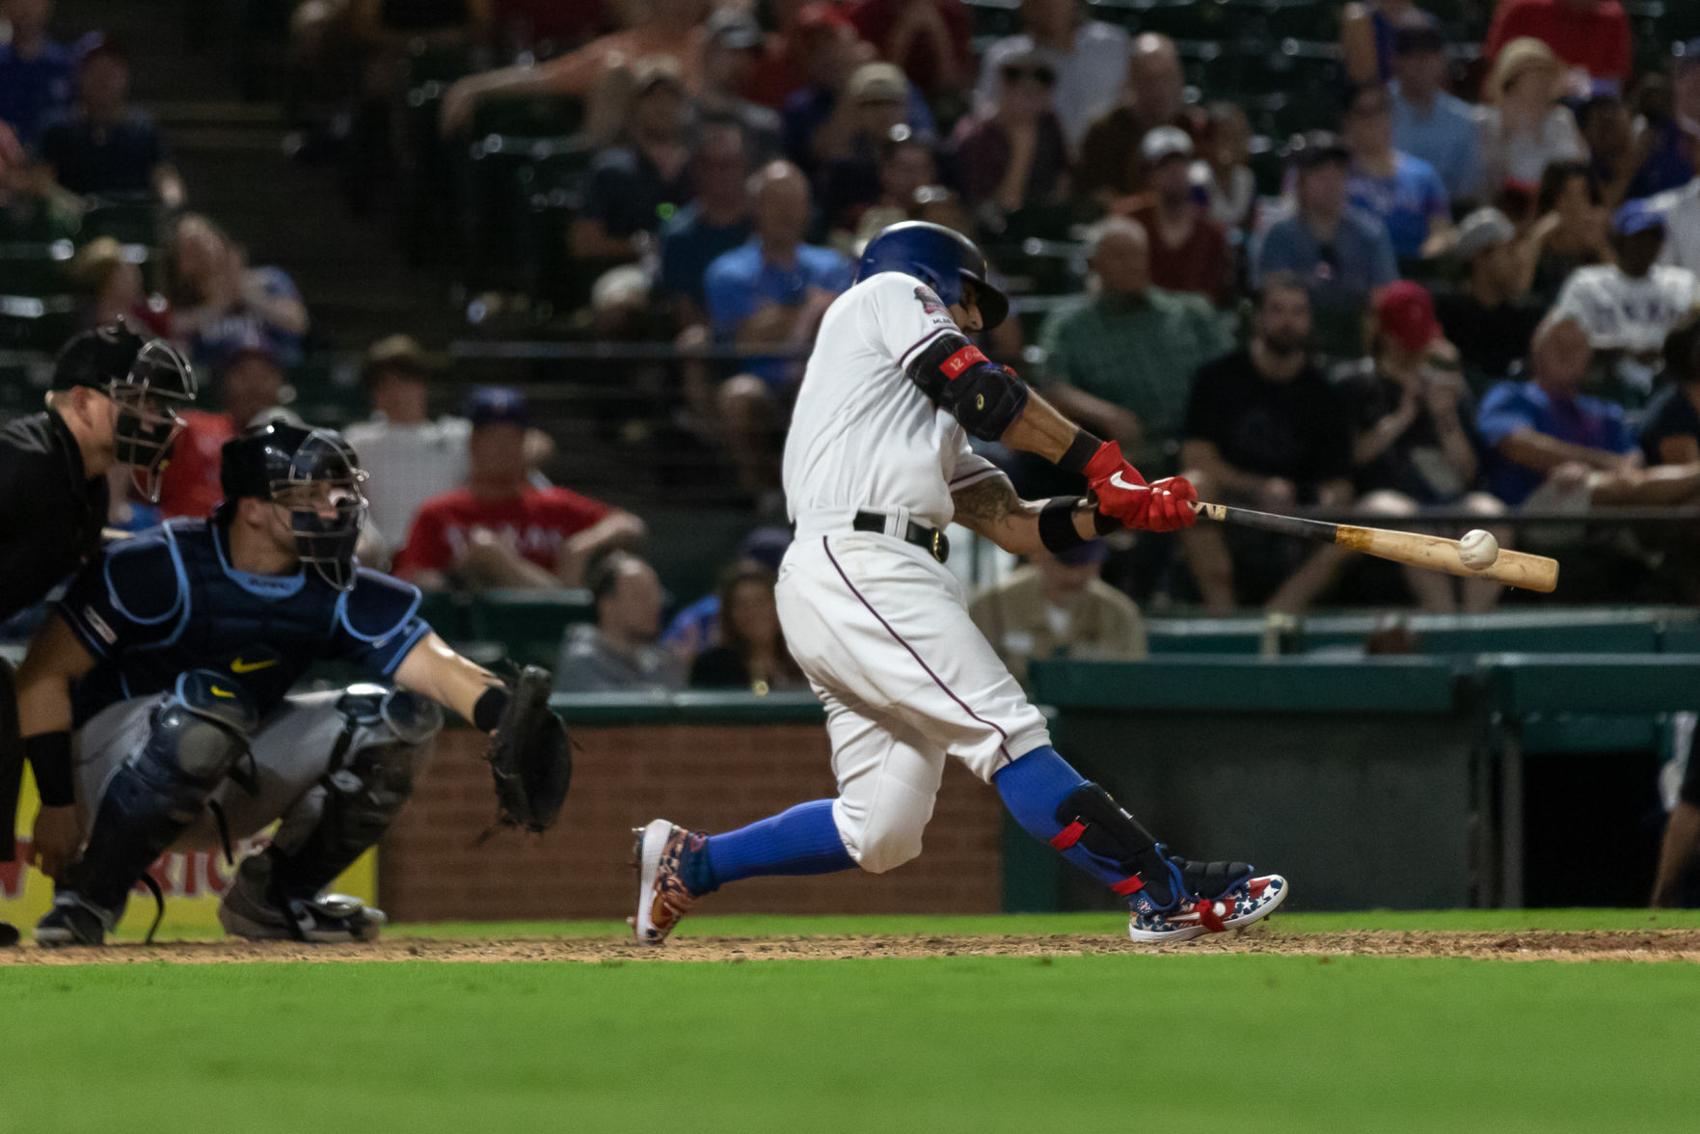 Final UTA Night at Globe Life Park brings victory for Texas Rangers over Tampa Bay Rays